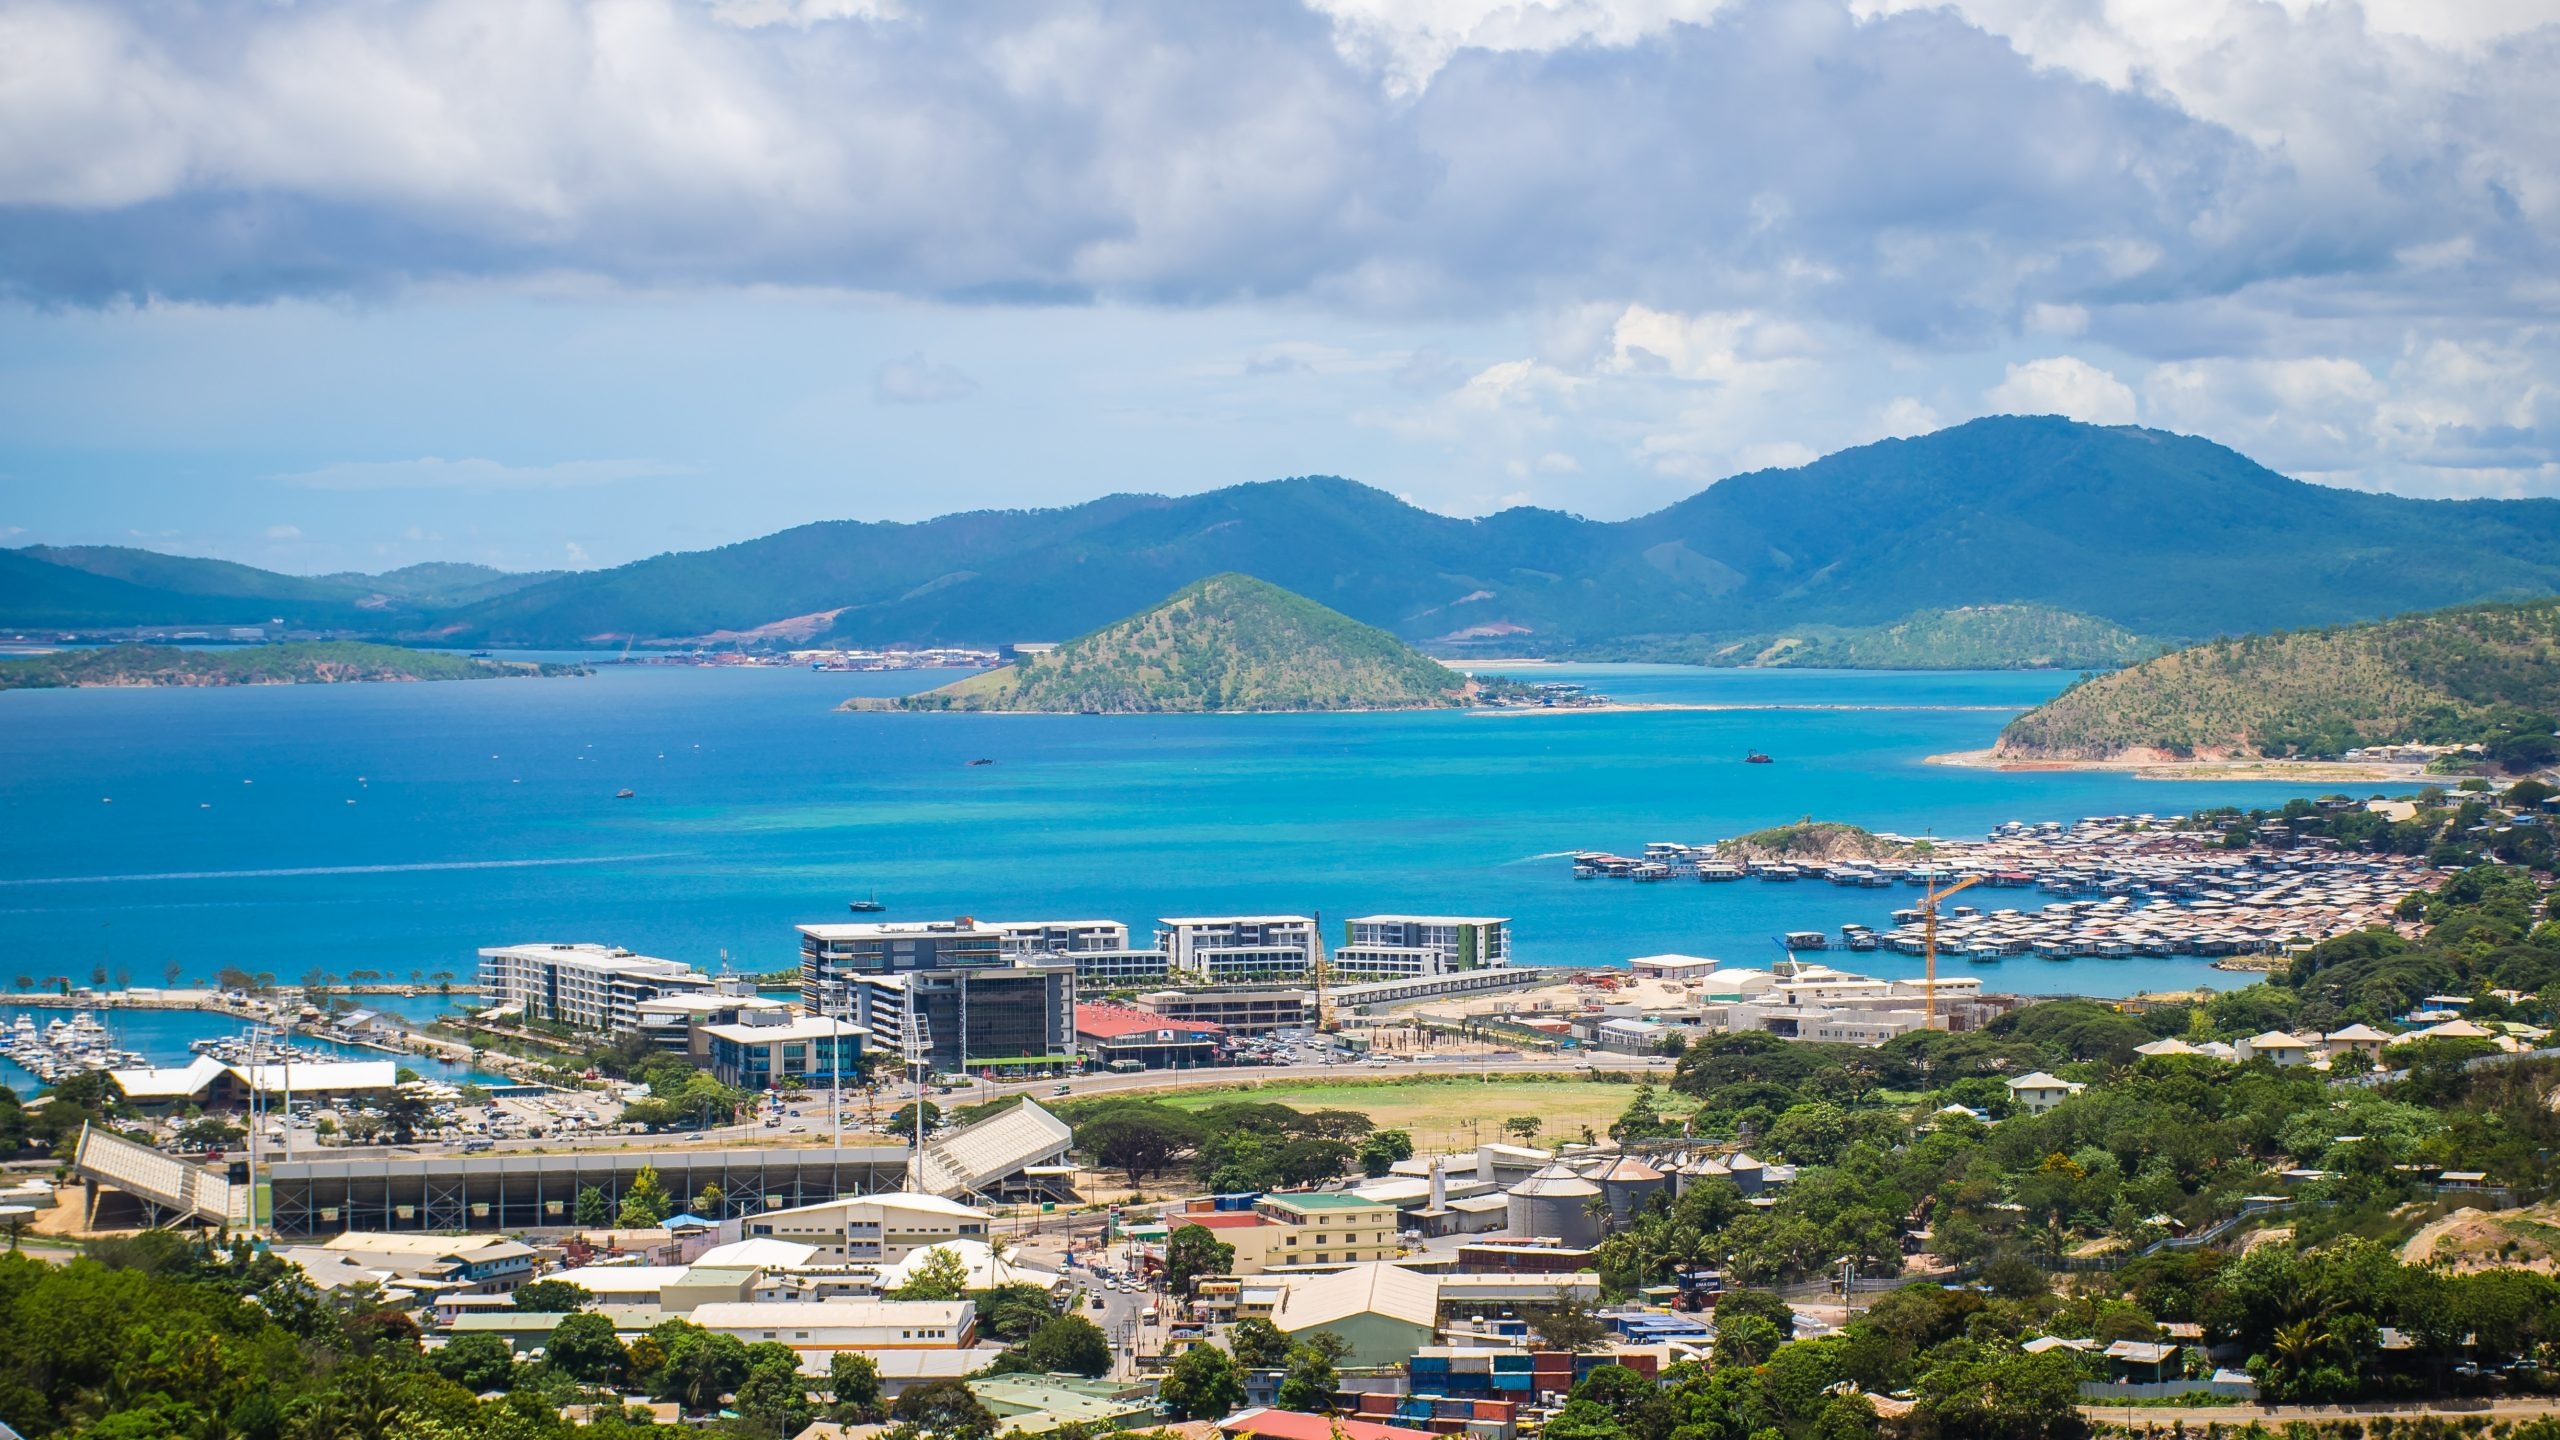 Port Moresby, Airspace network, Aviation deal, Frequentis upgrade, 2560x1440 HD Desktop